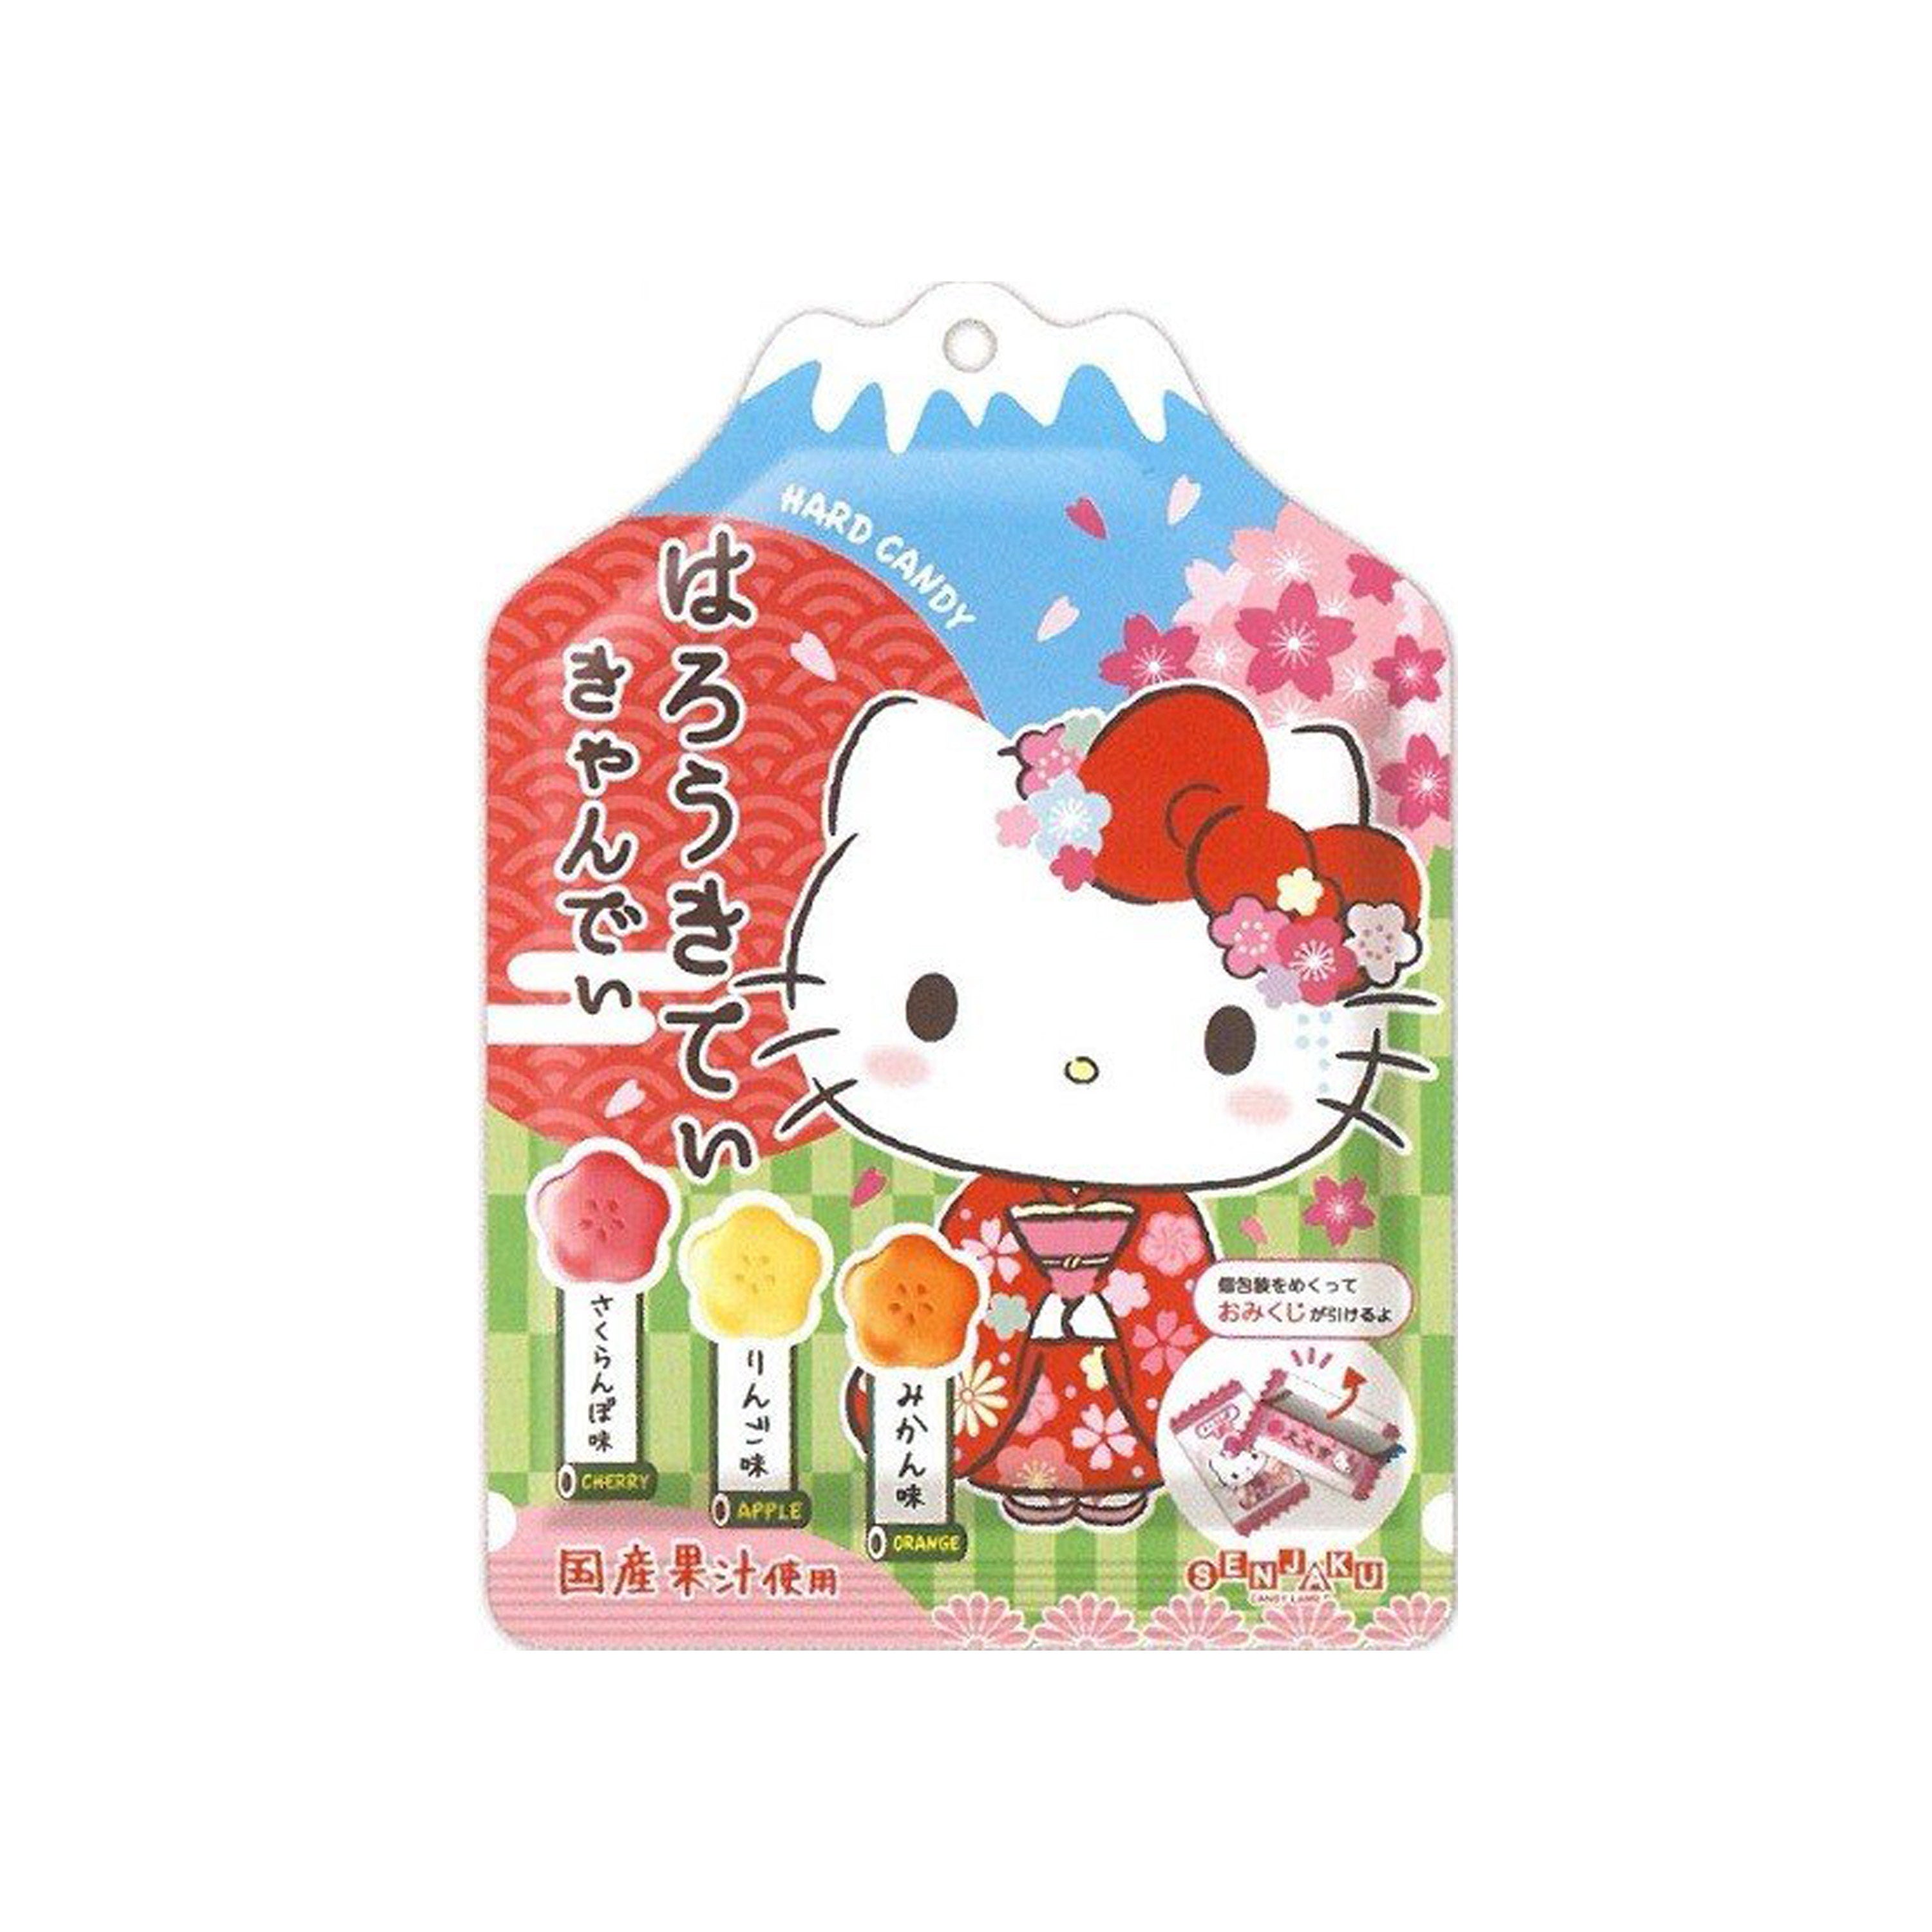 Senjakuame Honpo Hello Kitty Candy 65g  (Pack of 6) D15